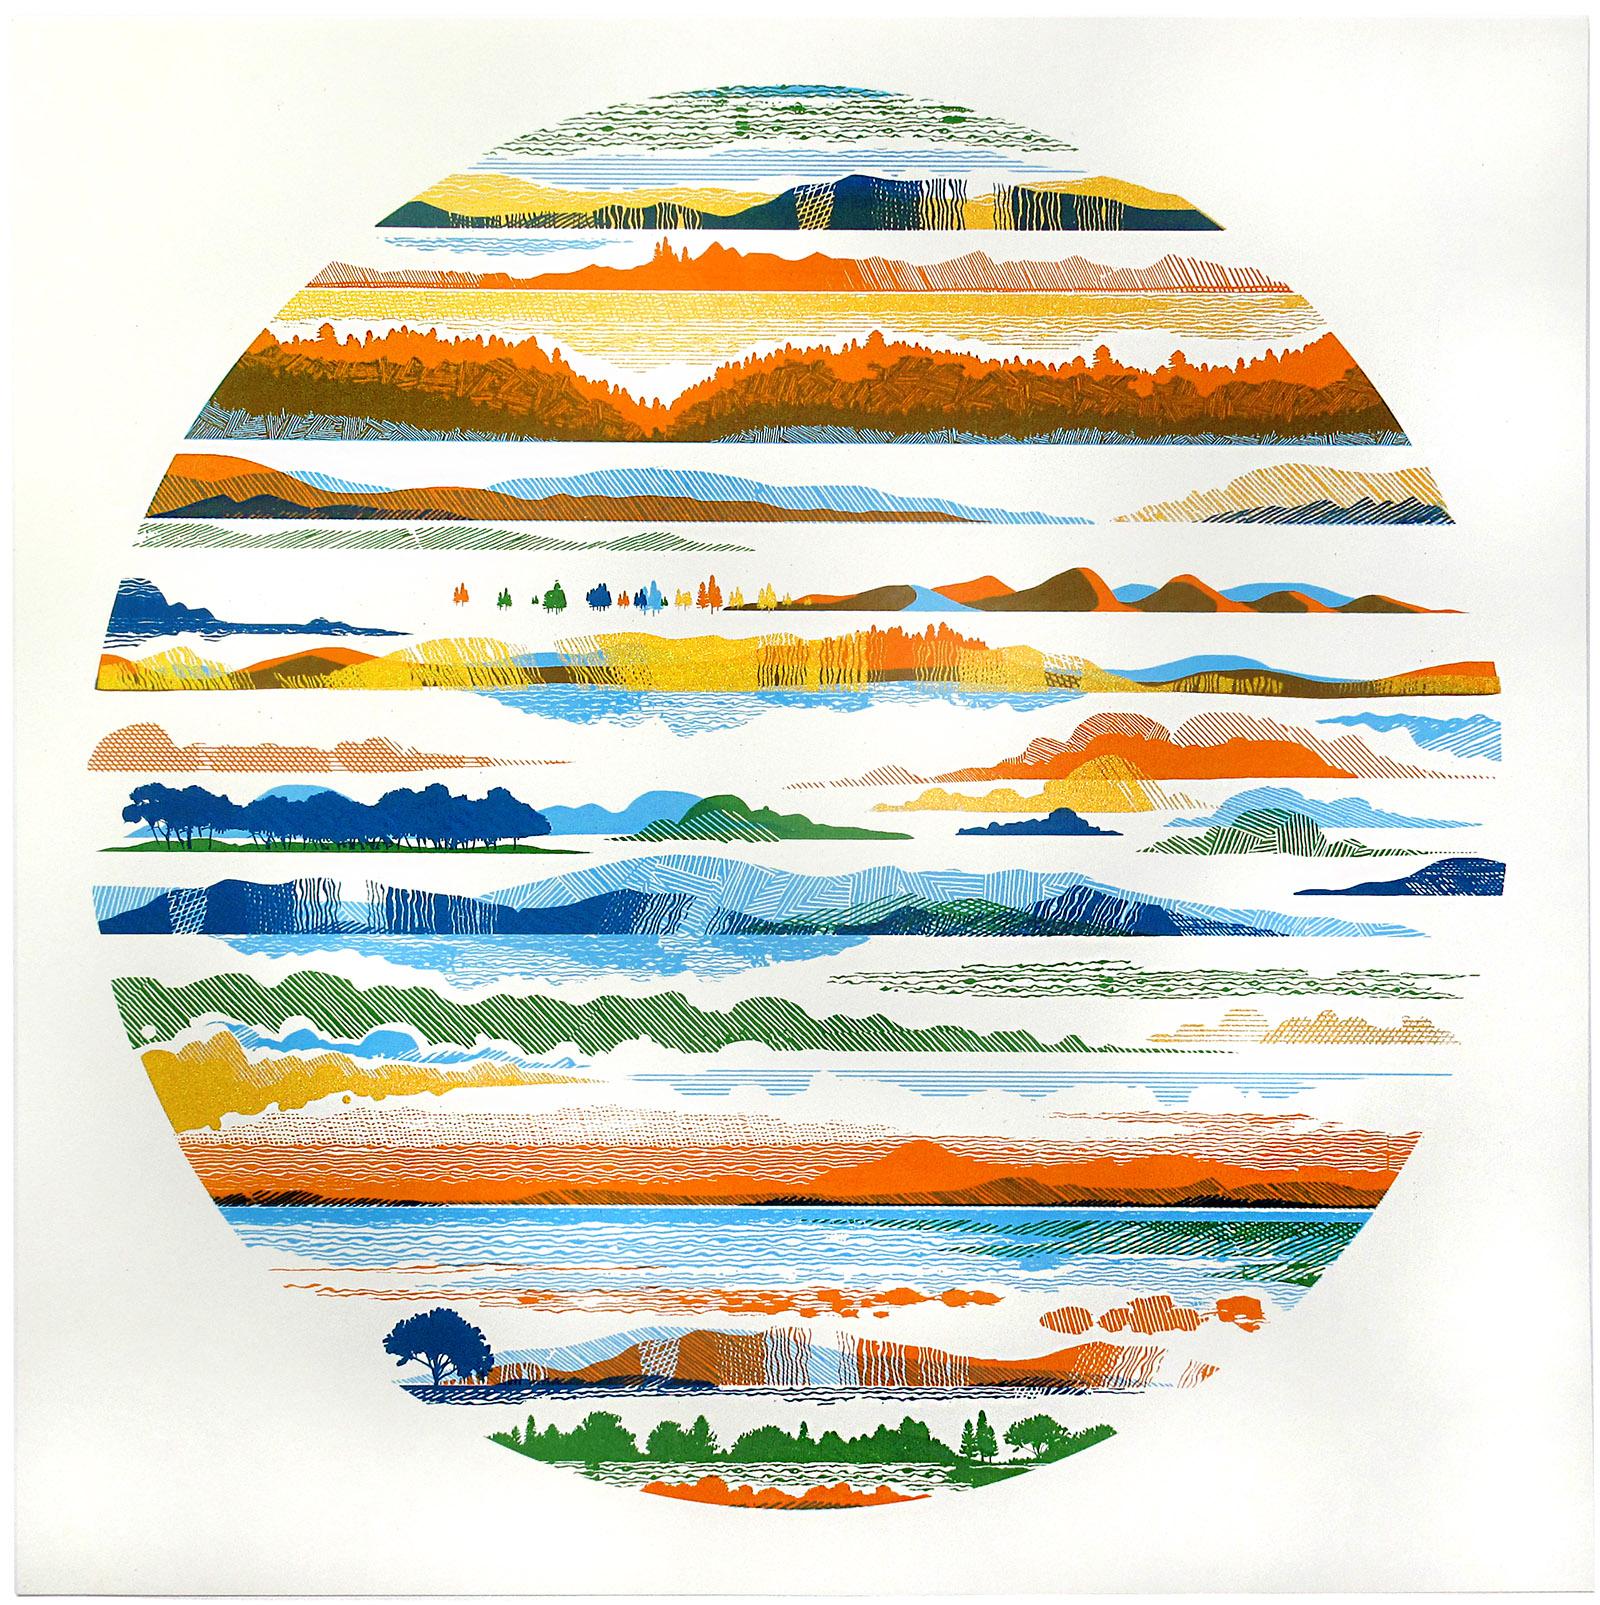 Vantage point by Chris Keegan.
This Five colour handmade screen print depicts a multi-layered dynamic set of landscapes all floating above and below each other. Created is an image of rolling hills overlapping and interweaving in layers of colour